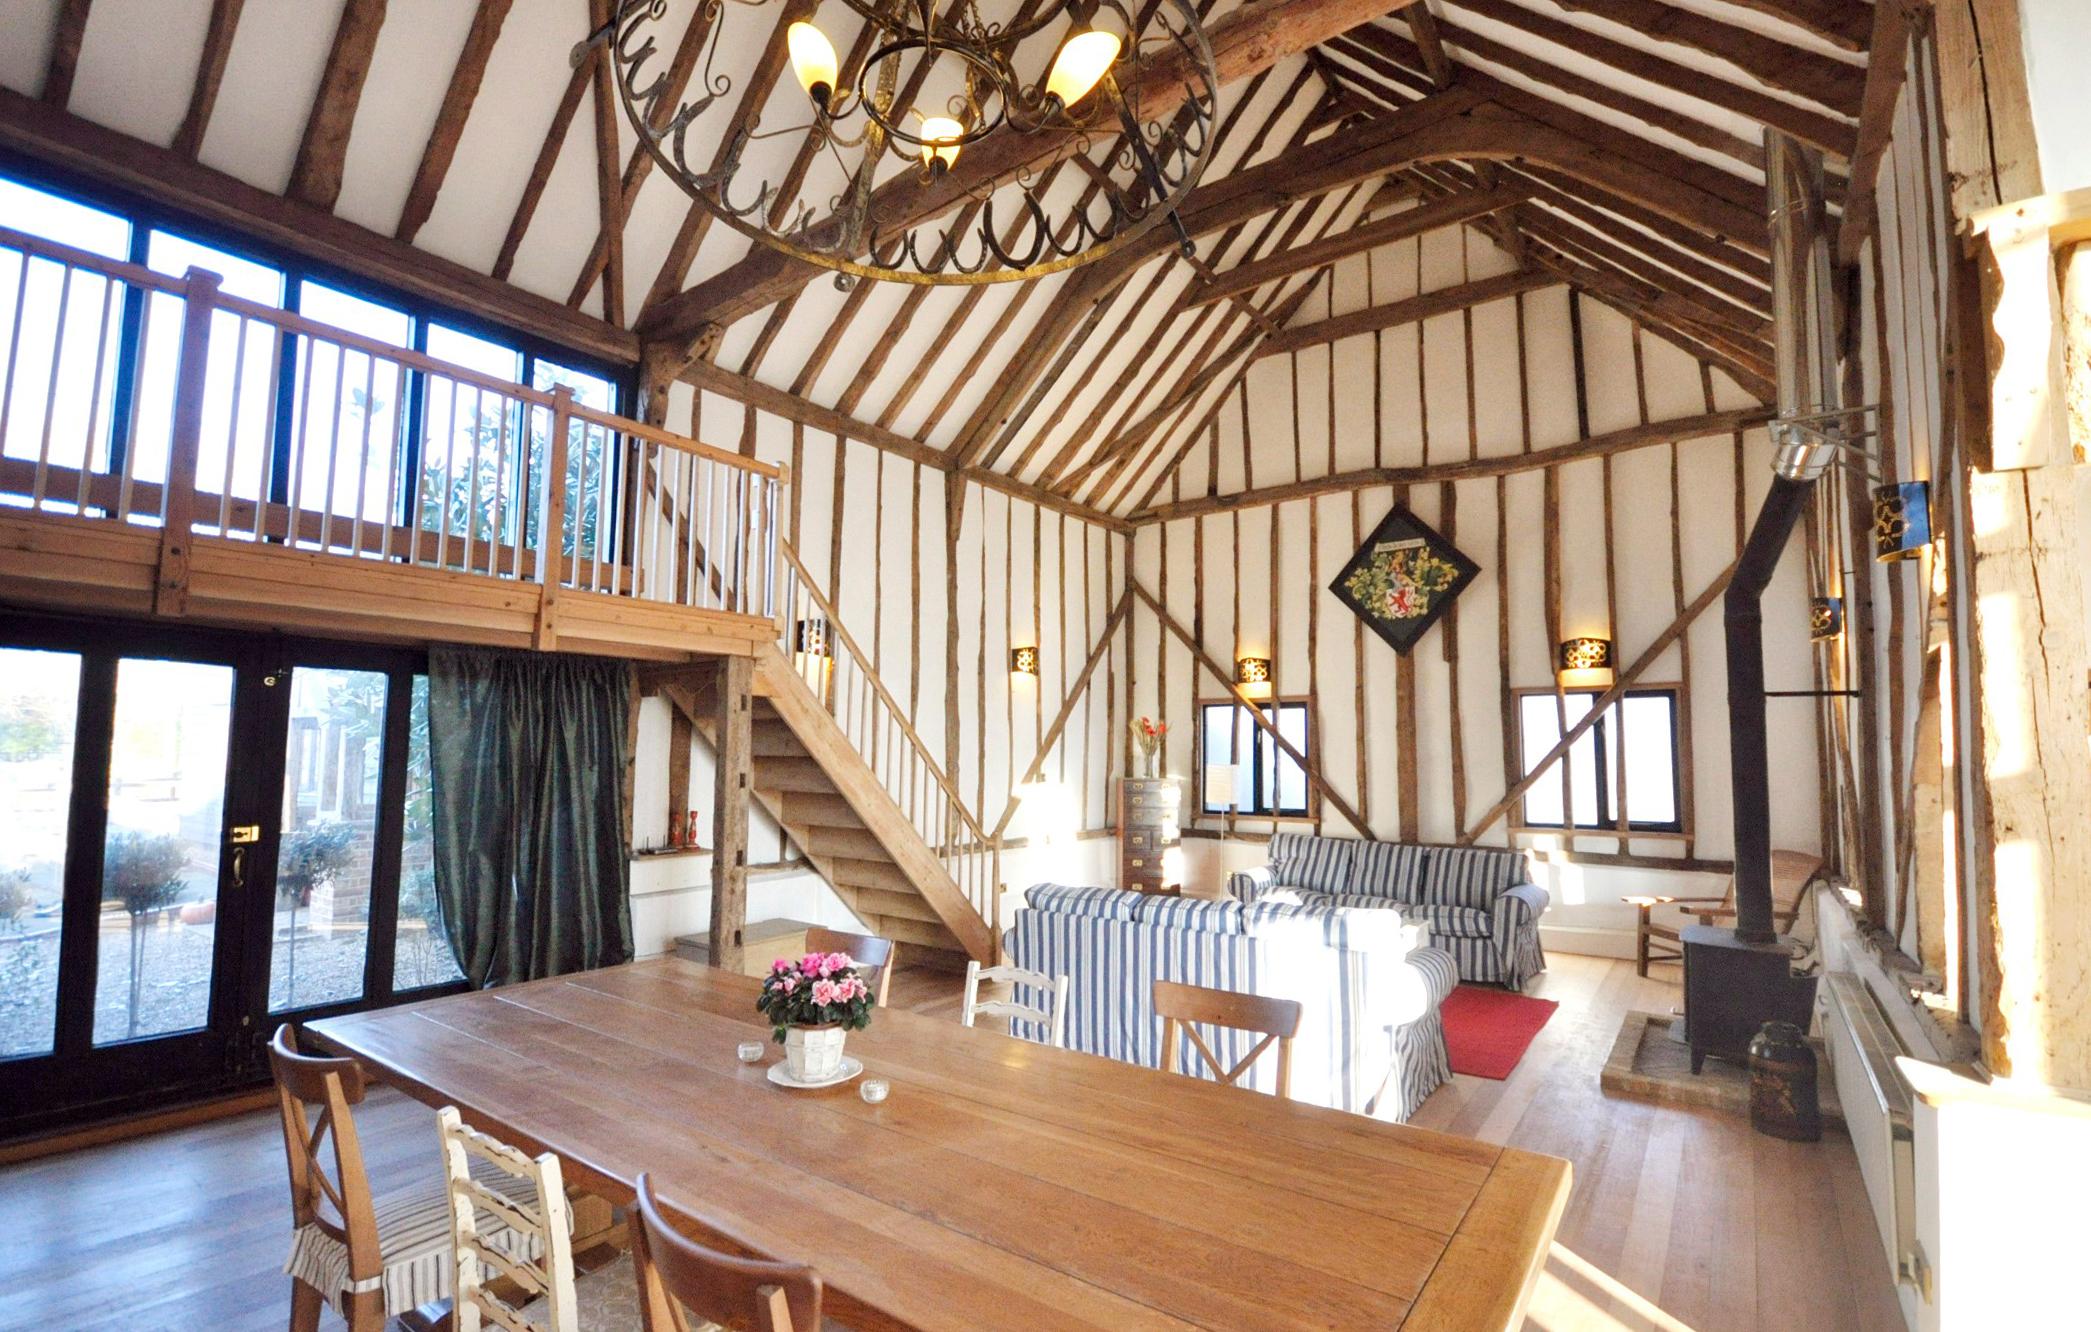 The self-catering Granary comes with a kitchen packed with provisions